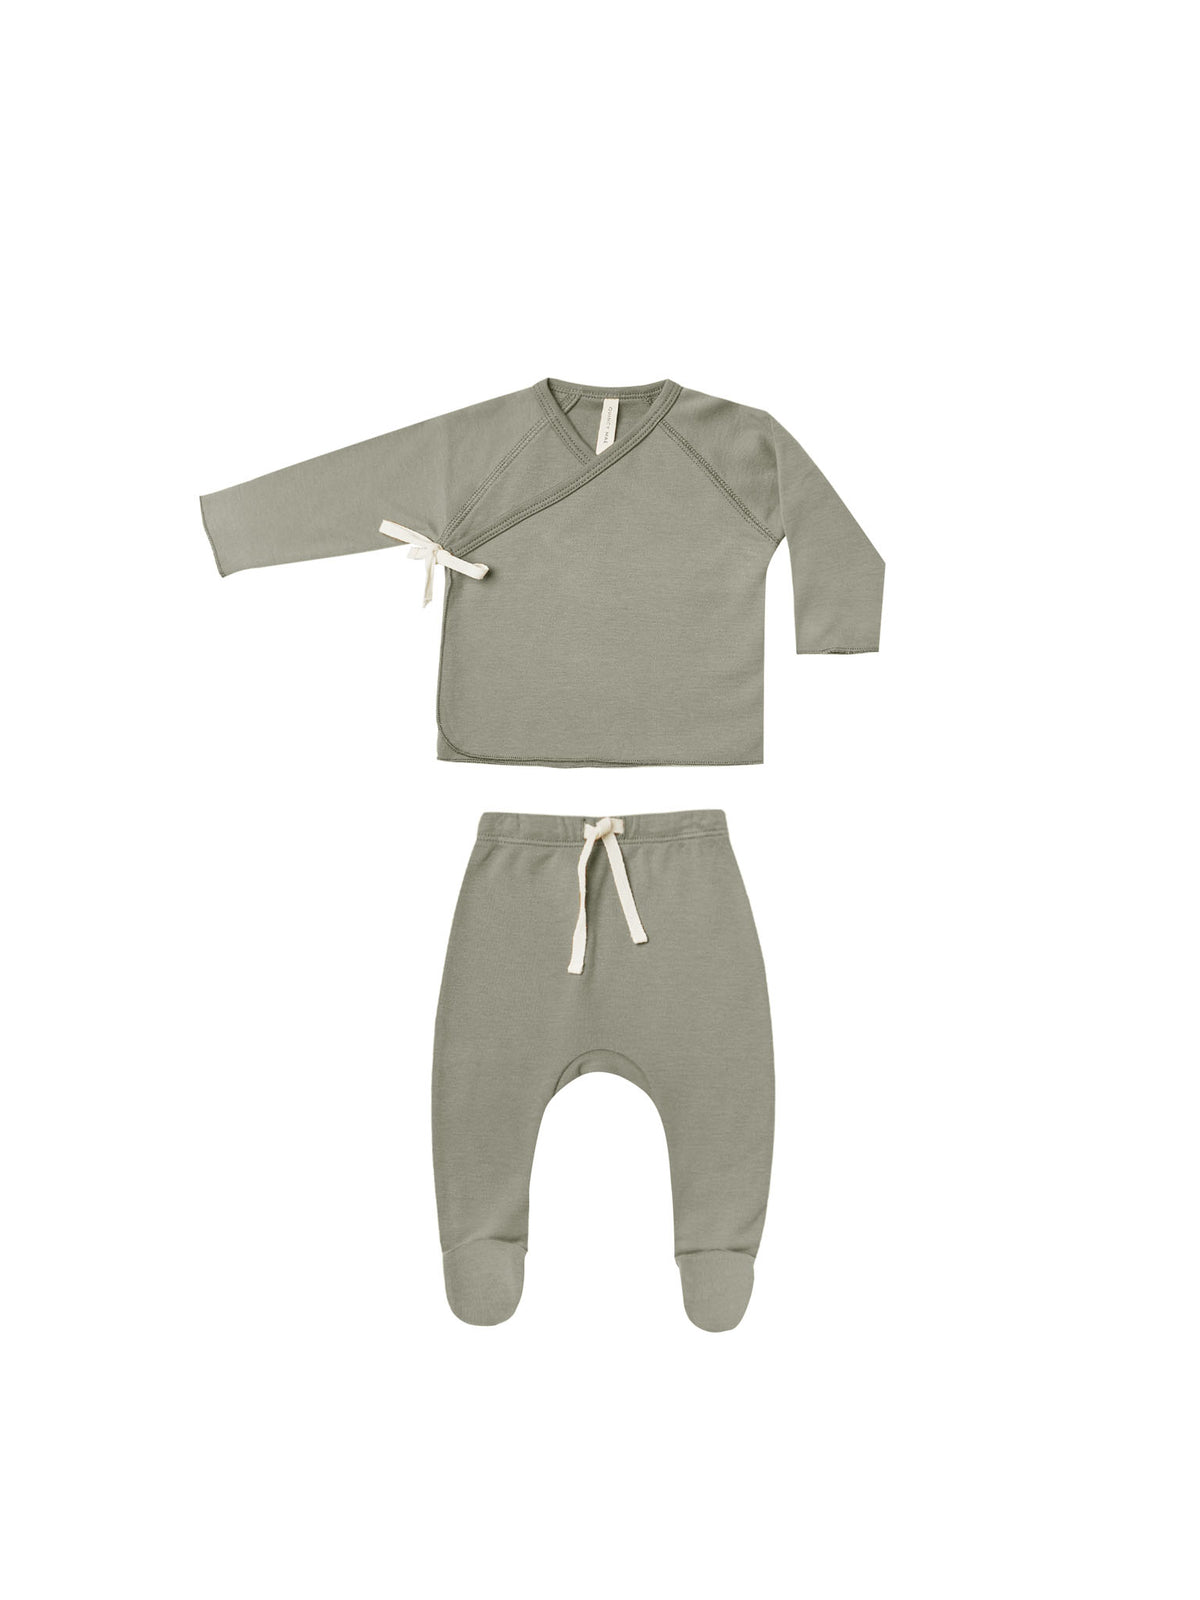 Quincy Mae | Wrap Top + Footed Pant Set || Basil